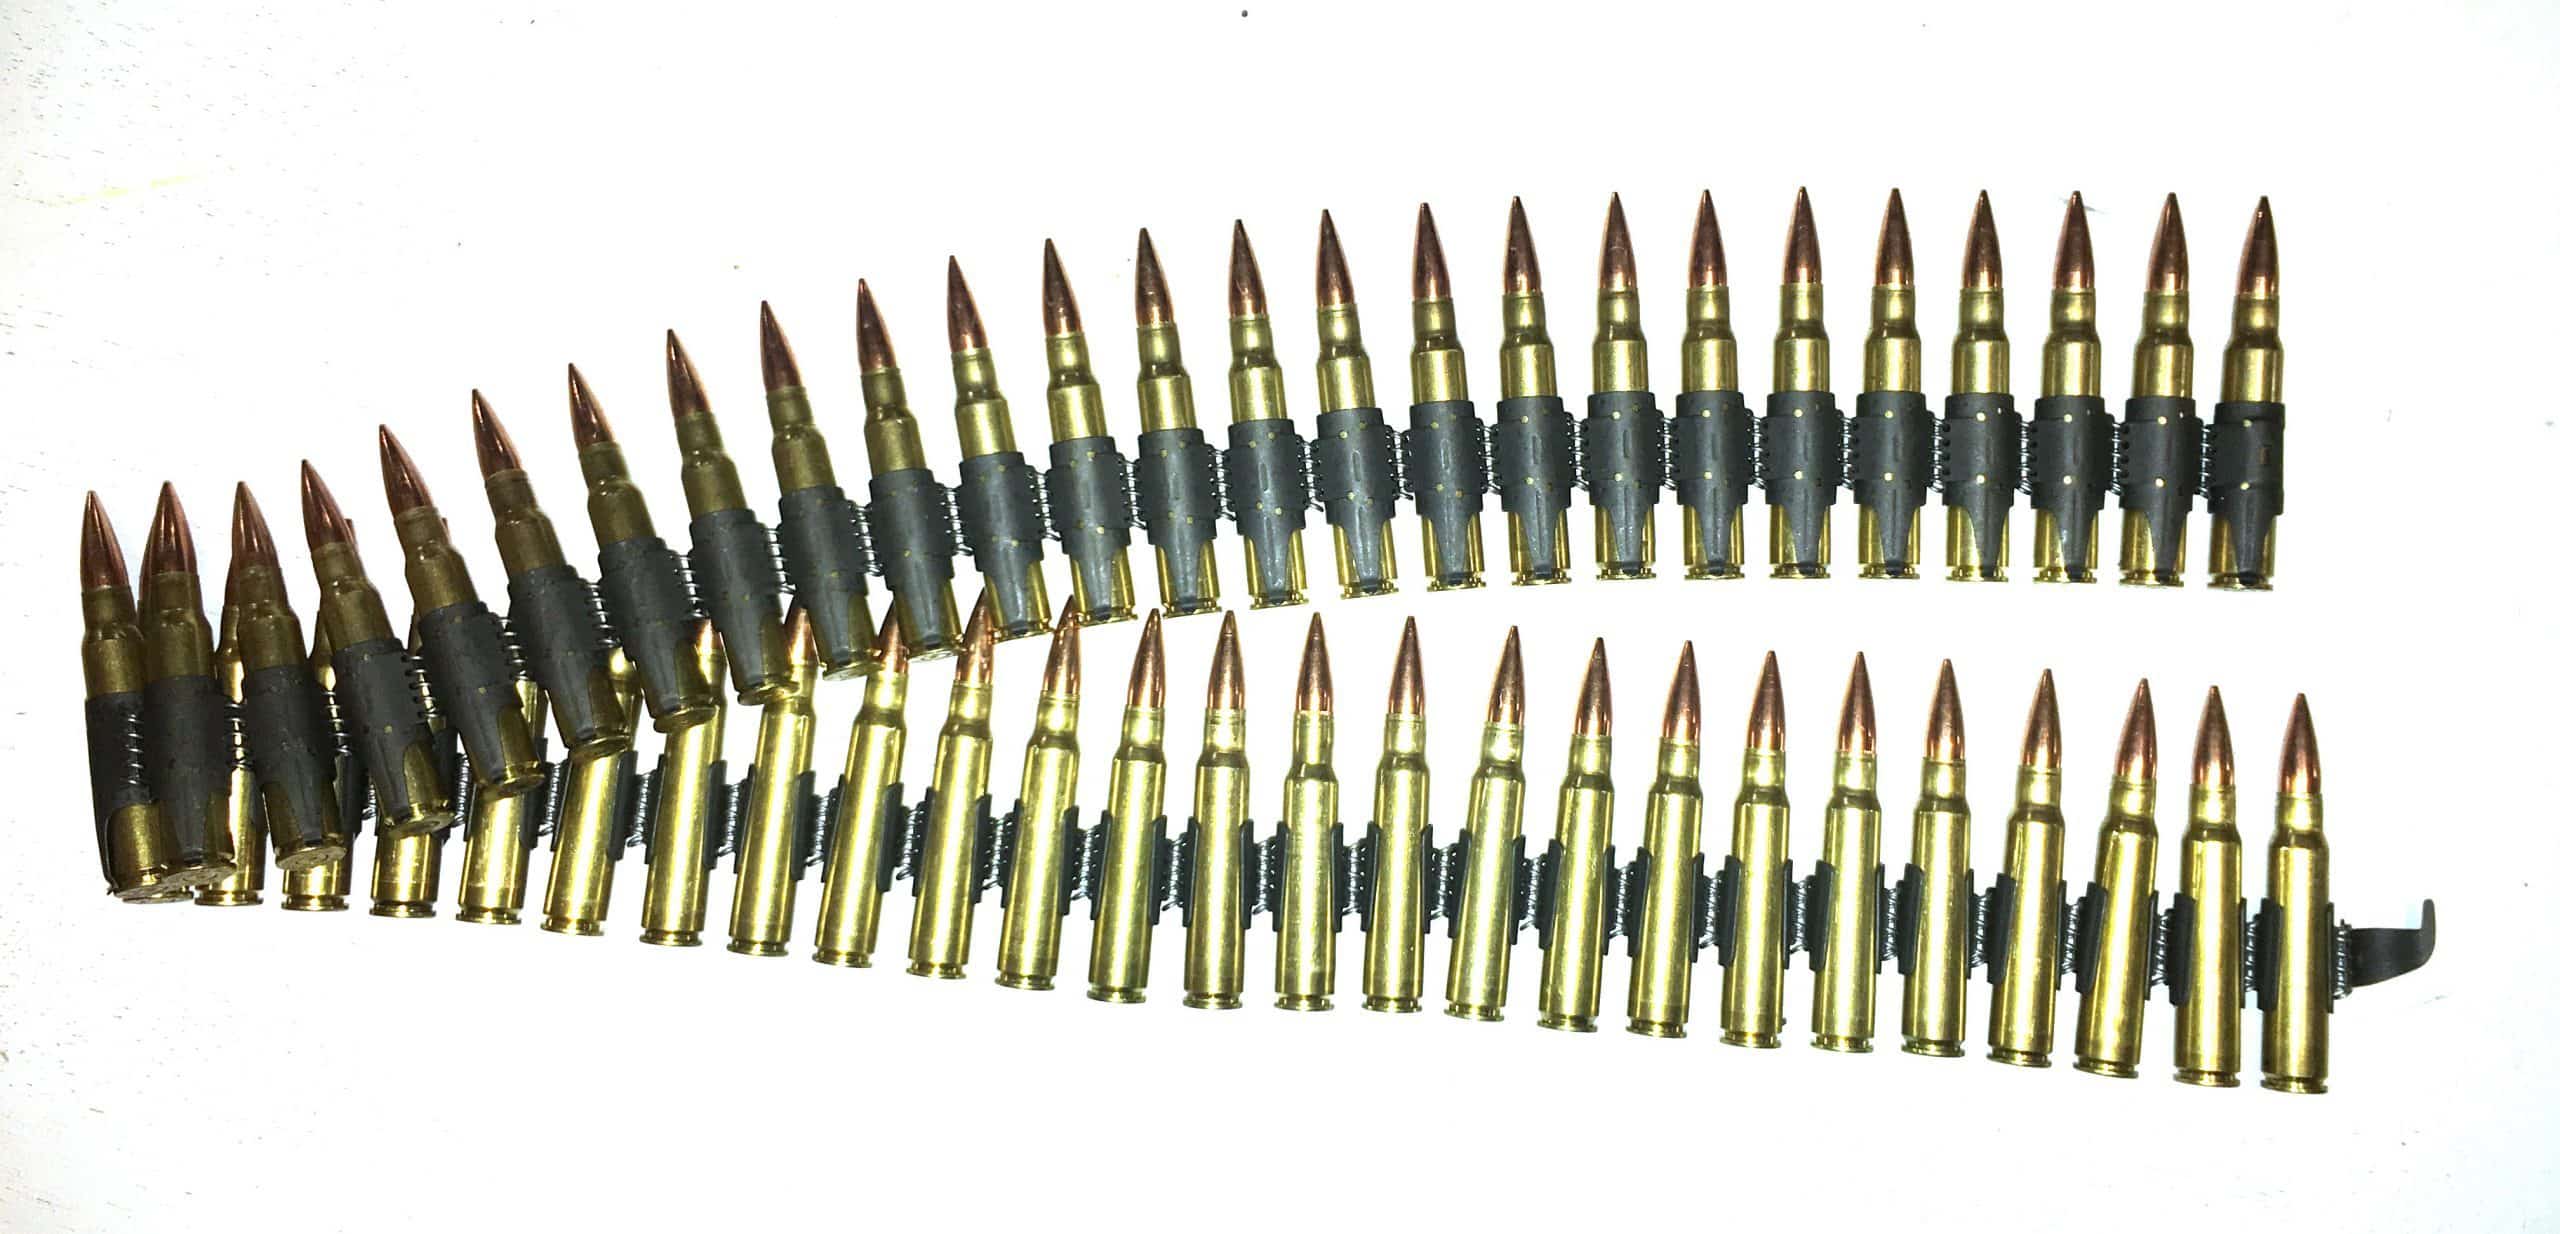 MG-42 Linked 8mm Mauser (MG34/42) - Snap Caps Dummy Rounds ...